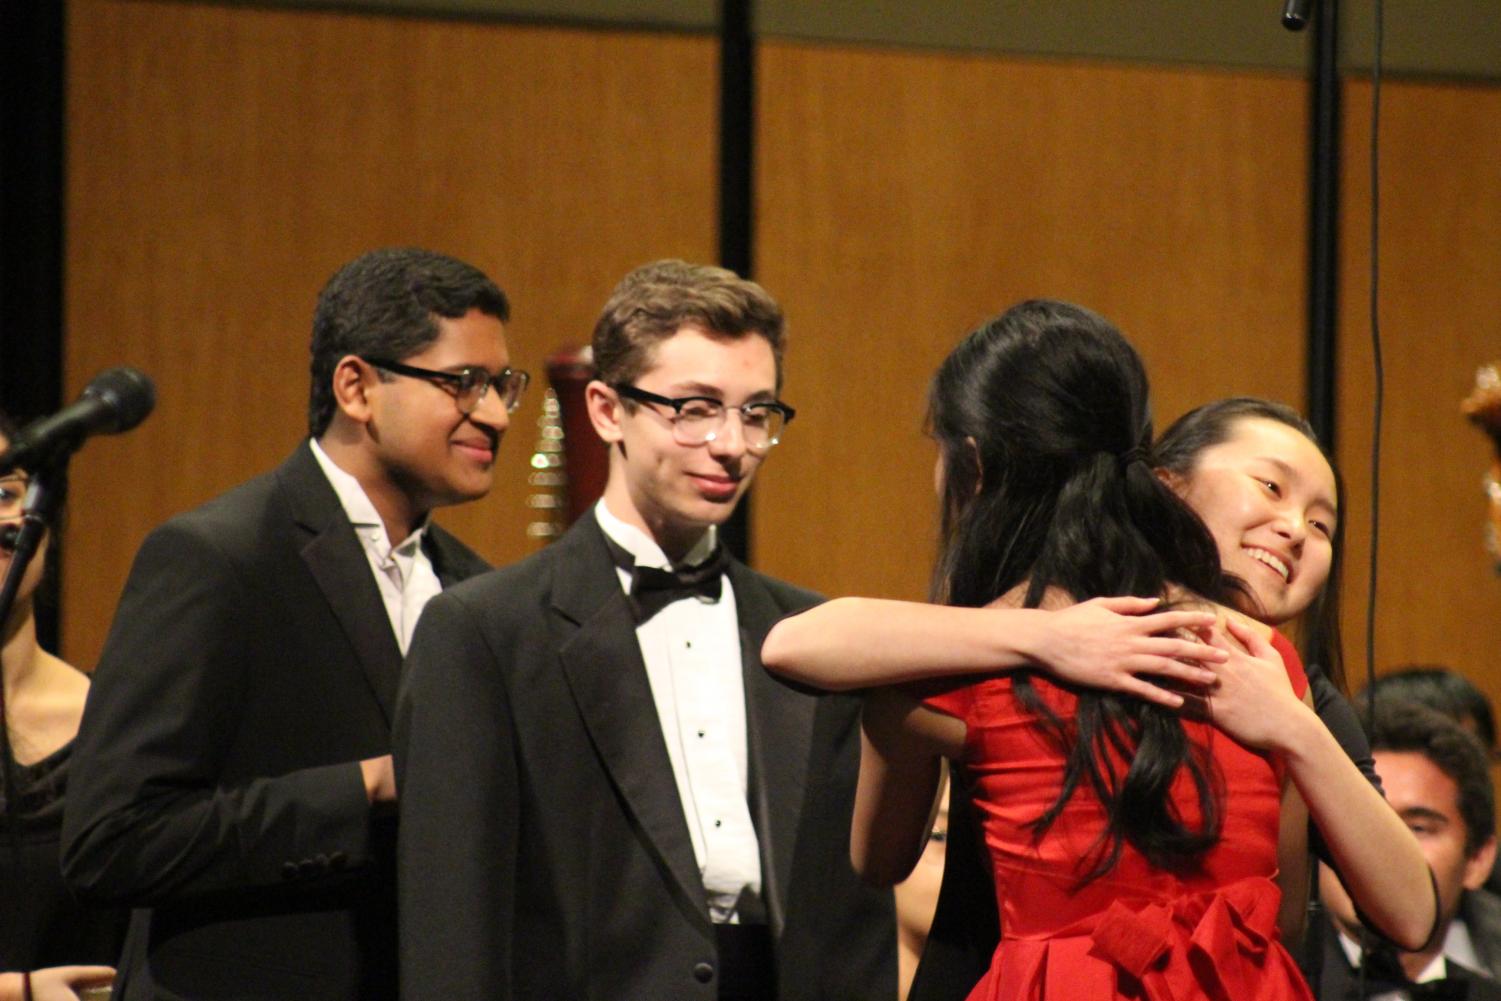 Erin Yuan '20, Sam Wachtel '19, and Achuth Raghunath '19 line up to congratulate Stephanie Li '19. Li was the soloist for the concert and performed Ravel's Piano Concerto in G Major, Movement No. 1